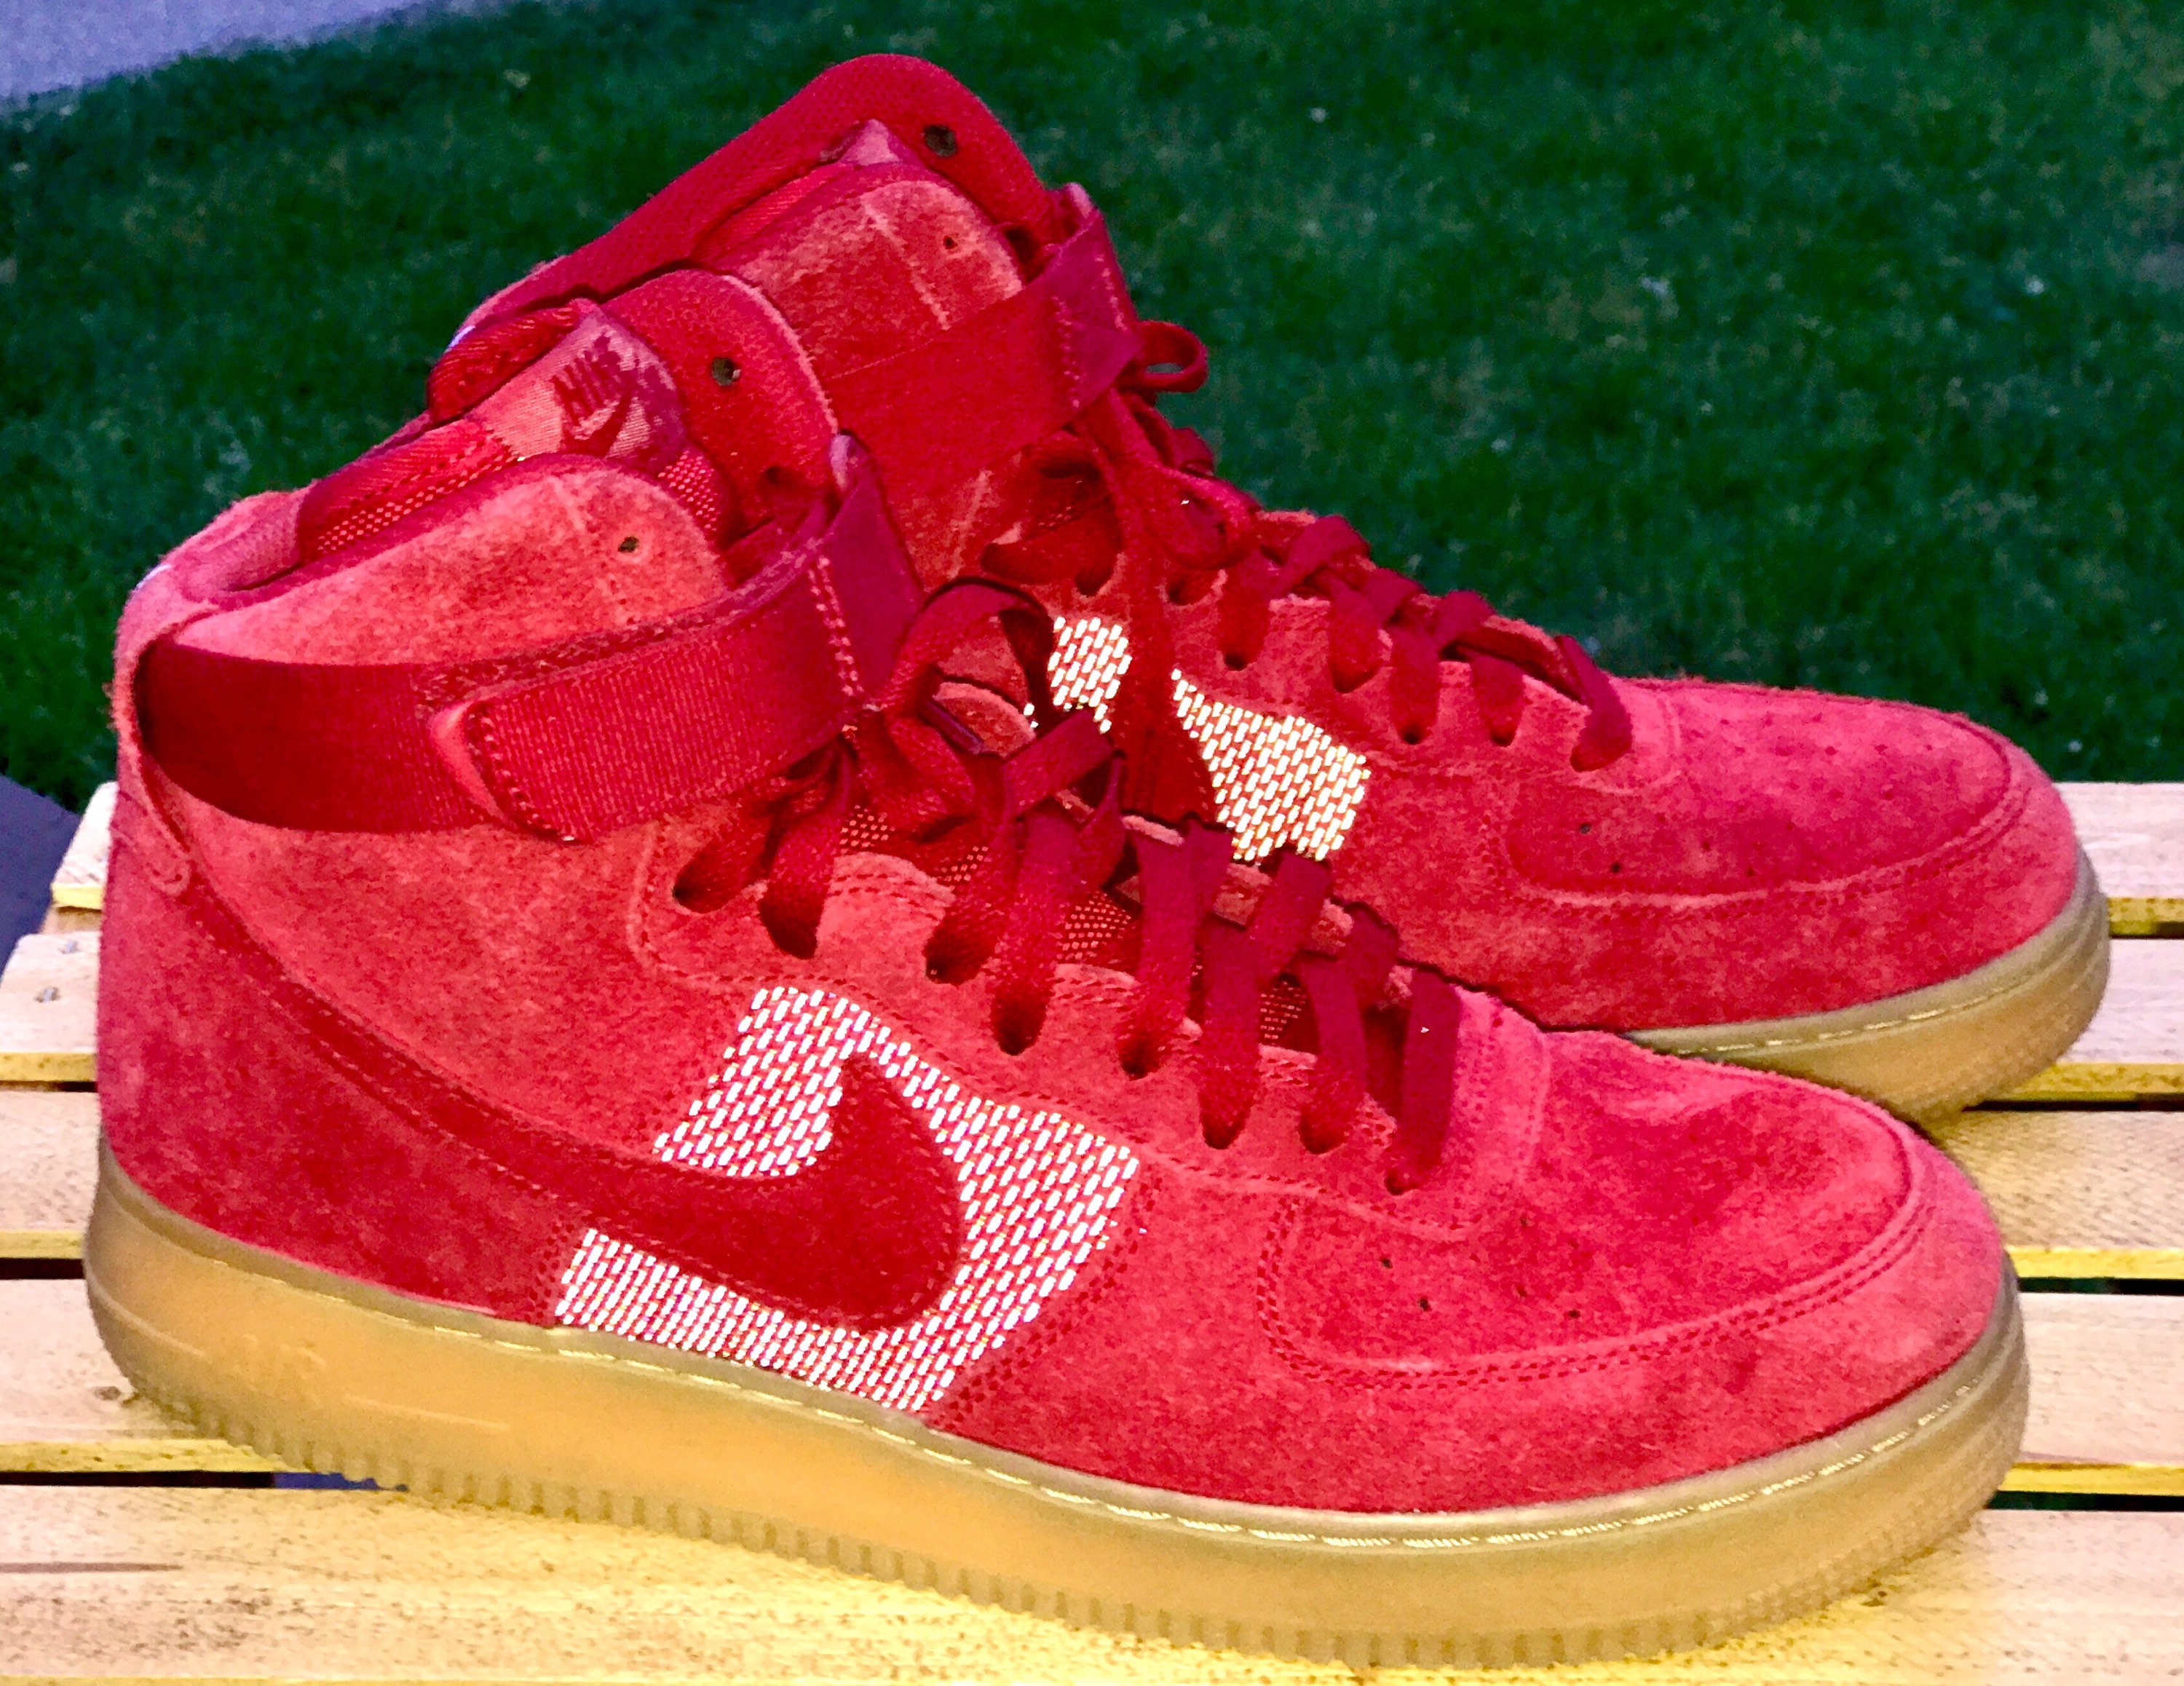 Men's Size 11 NIKE AIR FORCE 1 Red Suede Leather -